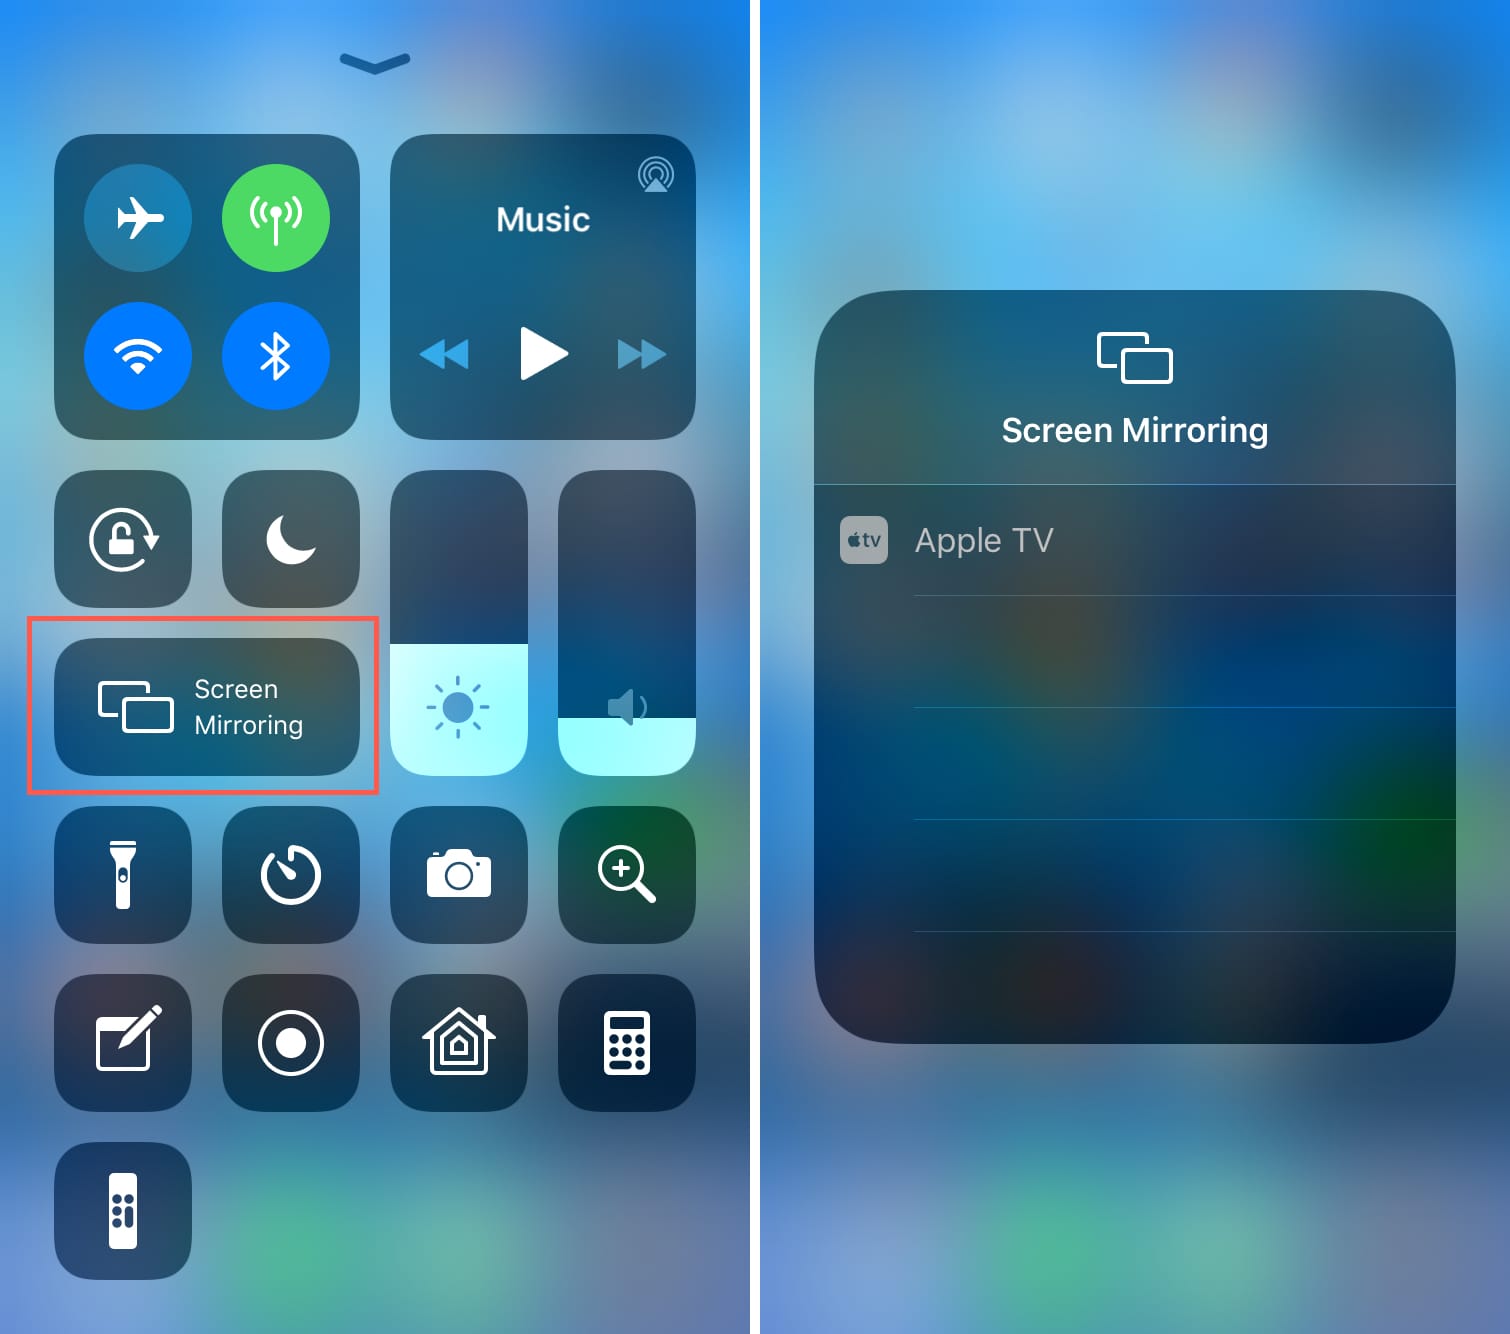 Iphone Or Ipad Display To Apple Tv, How To Use Screen Mirroring On Apple Tv